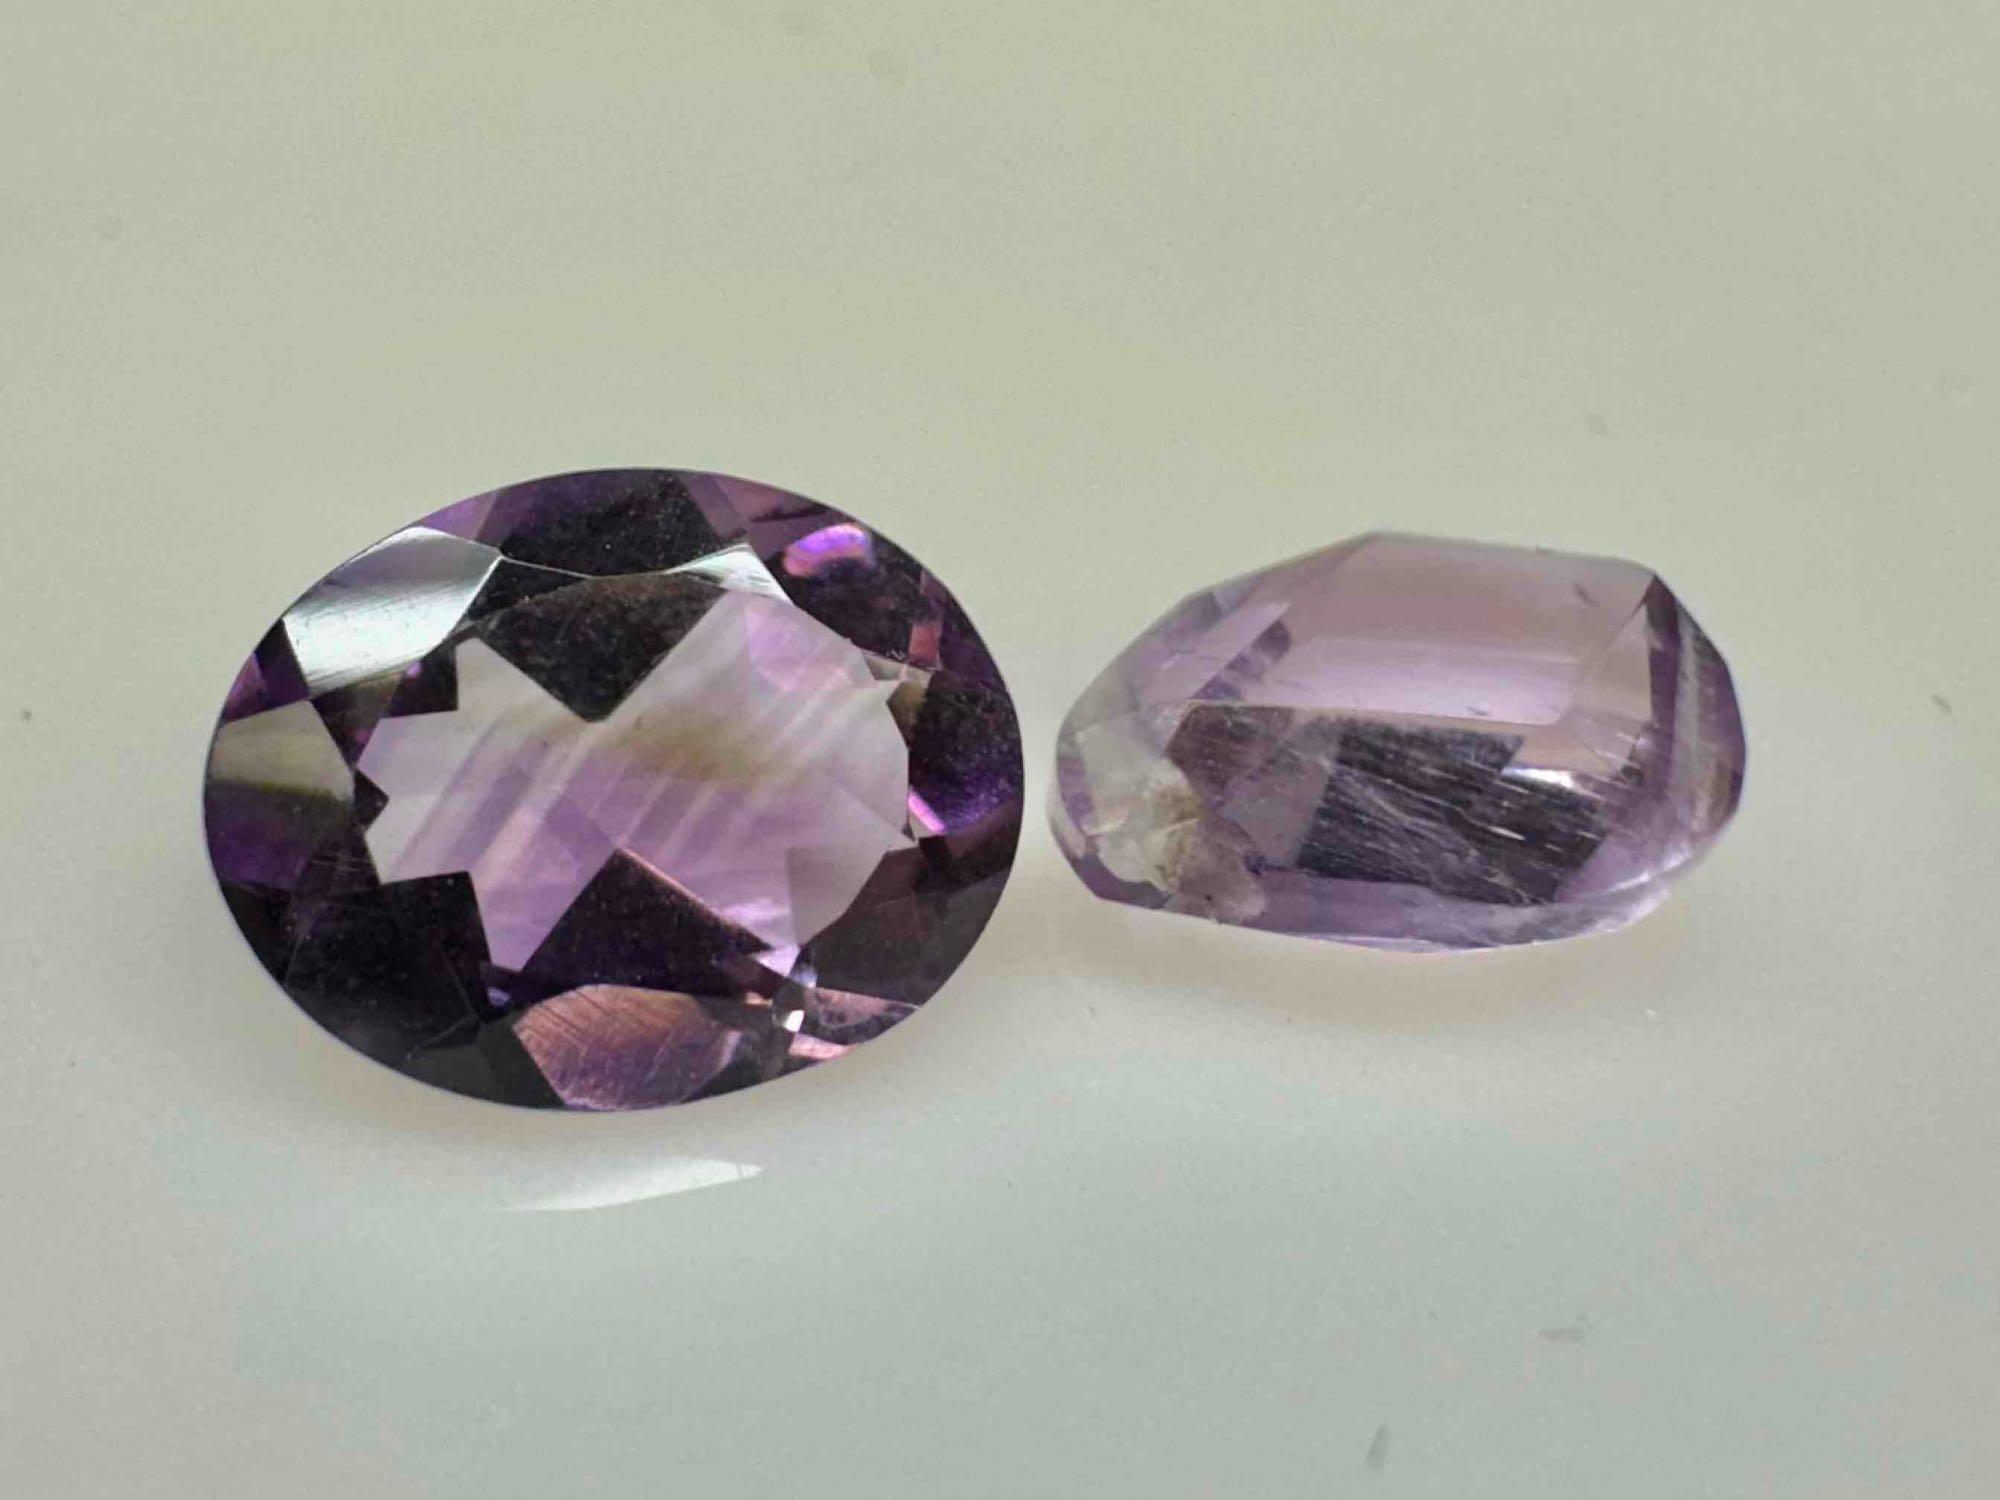 Pair of Amethyst Gemstones Oval and Pear Cut 5.1ct total